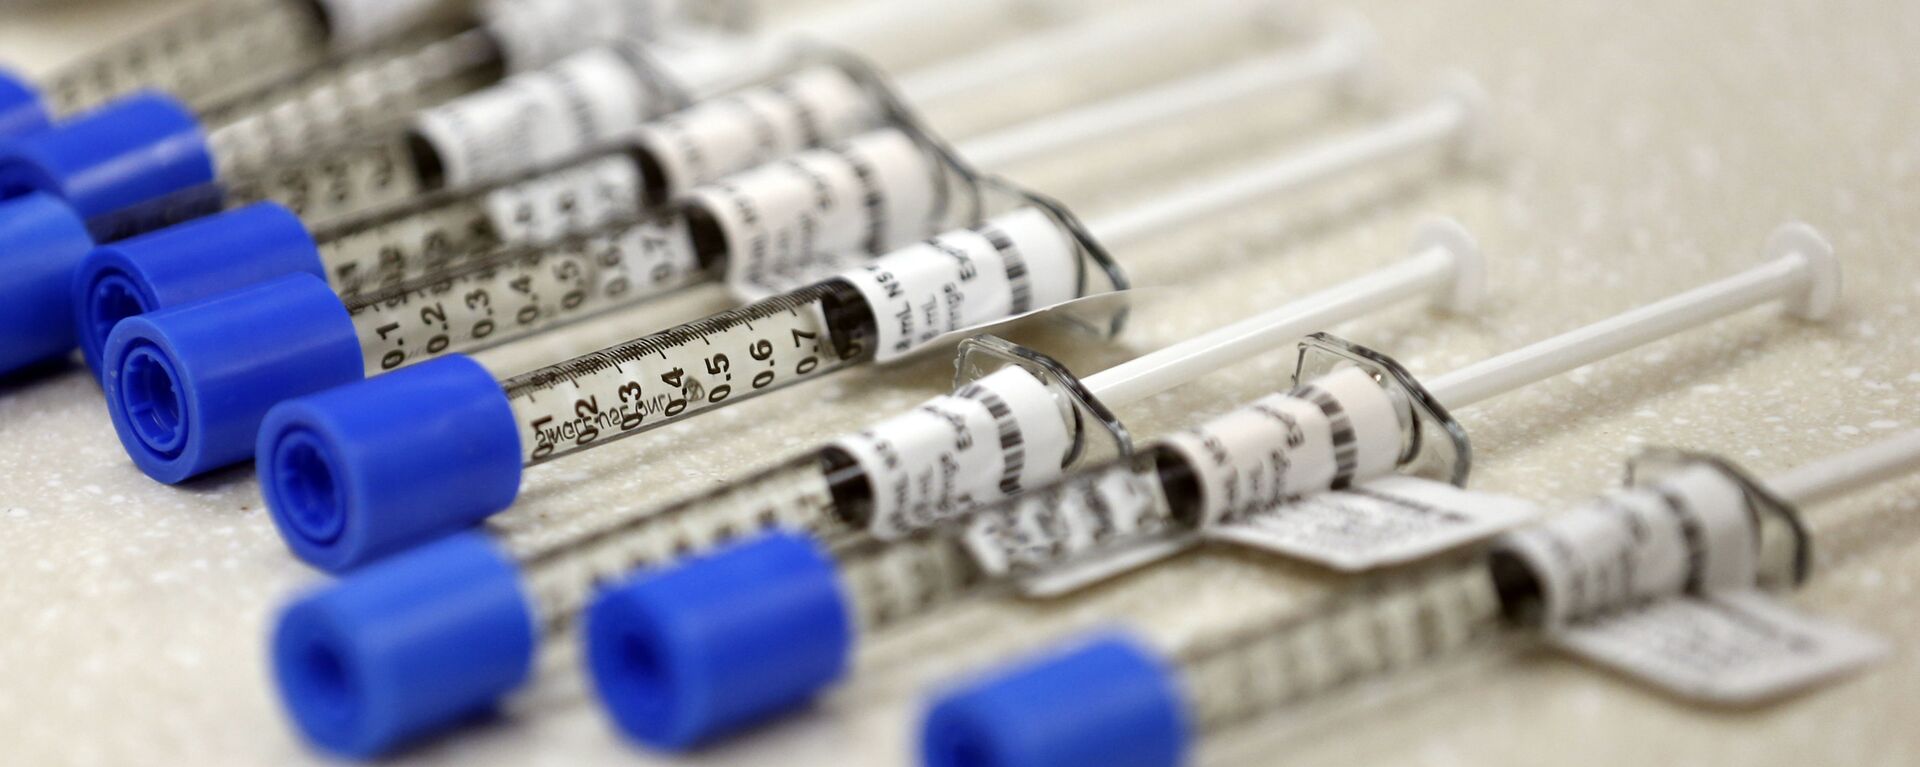 This file photo shows syringes of the opioid painkiller fentanyl in an inpatient pharmacy. - Sputnik International, 1920, 22.12.2022